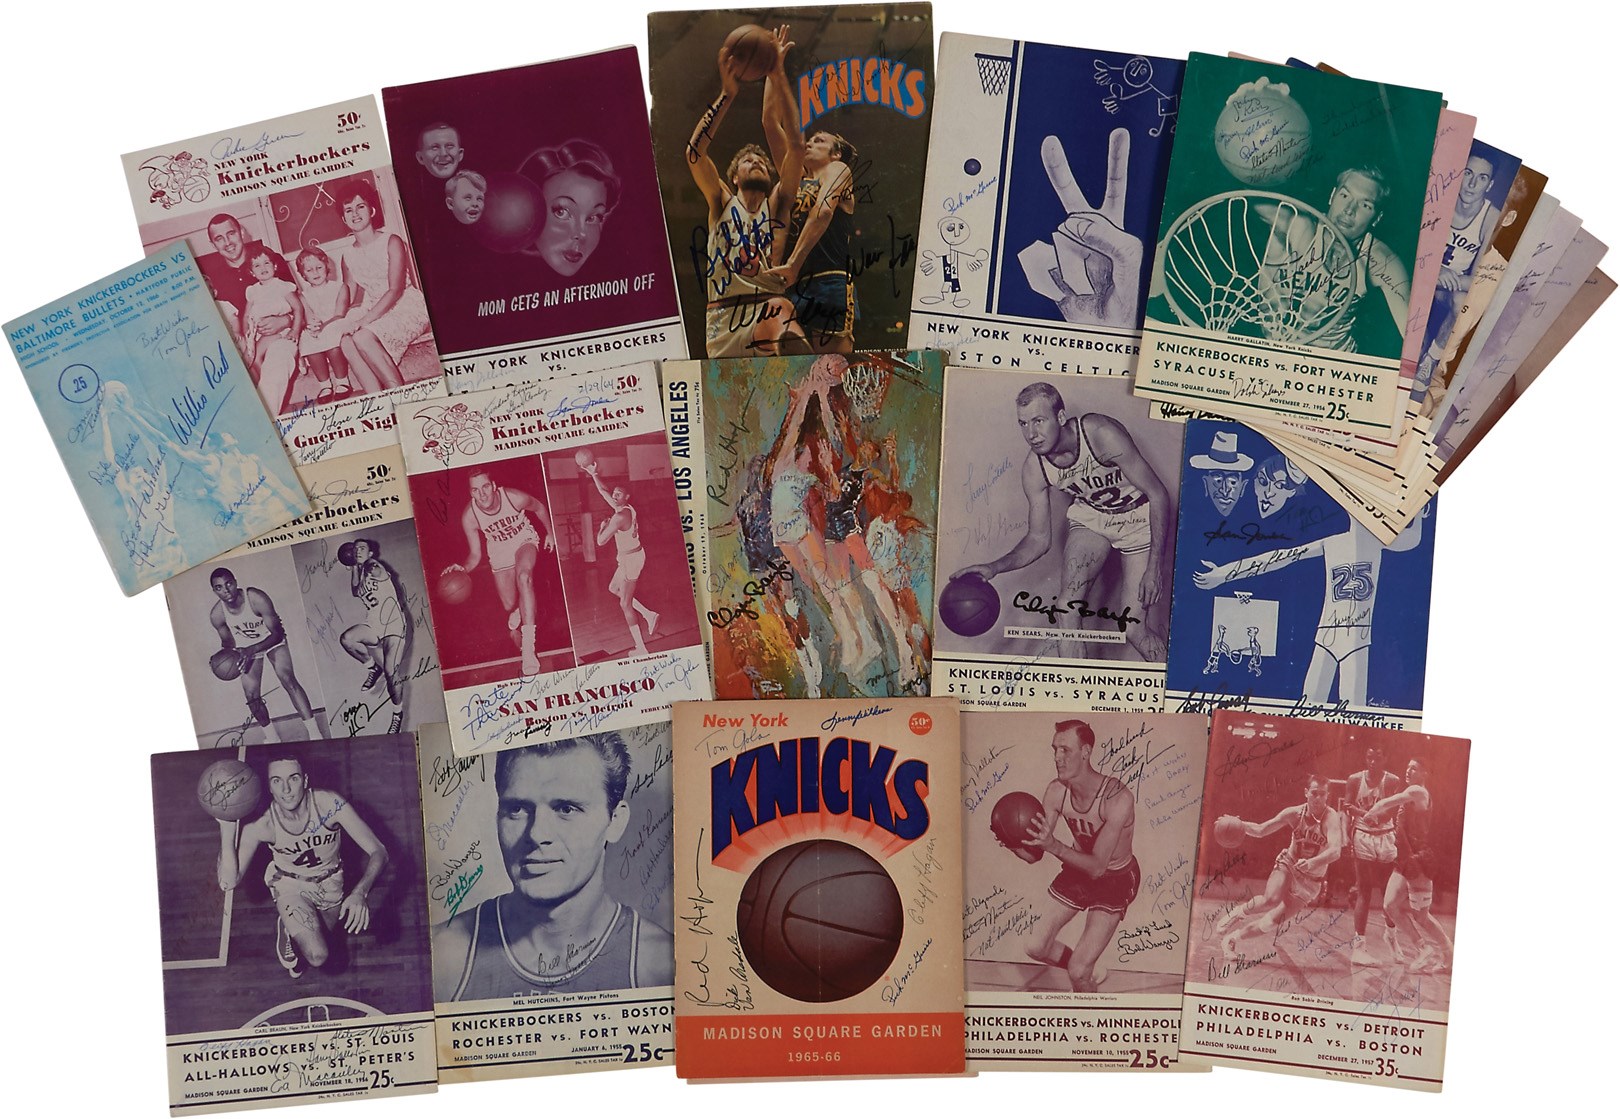 Basketball - 1940s-70s New York Knickerbockers Autographed Program Archive - 650+ Sigs (90+)